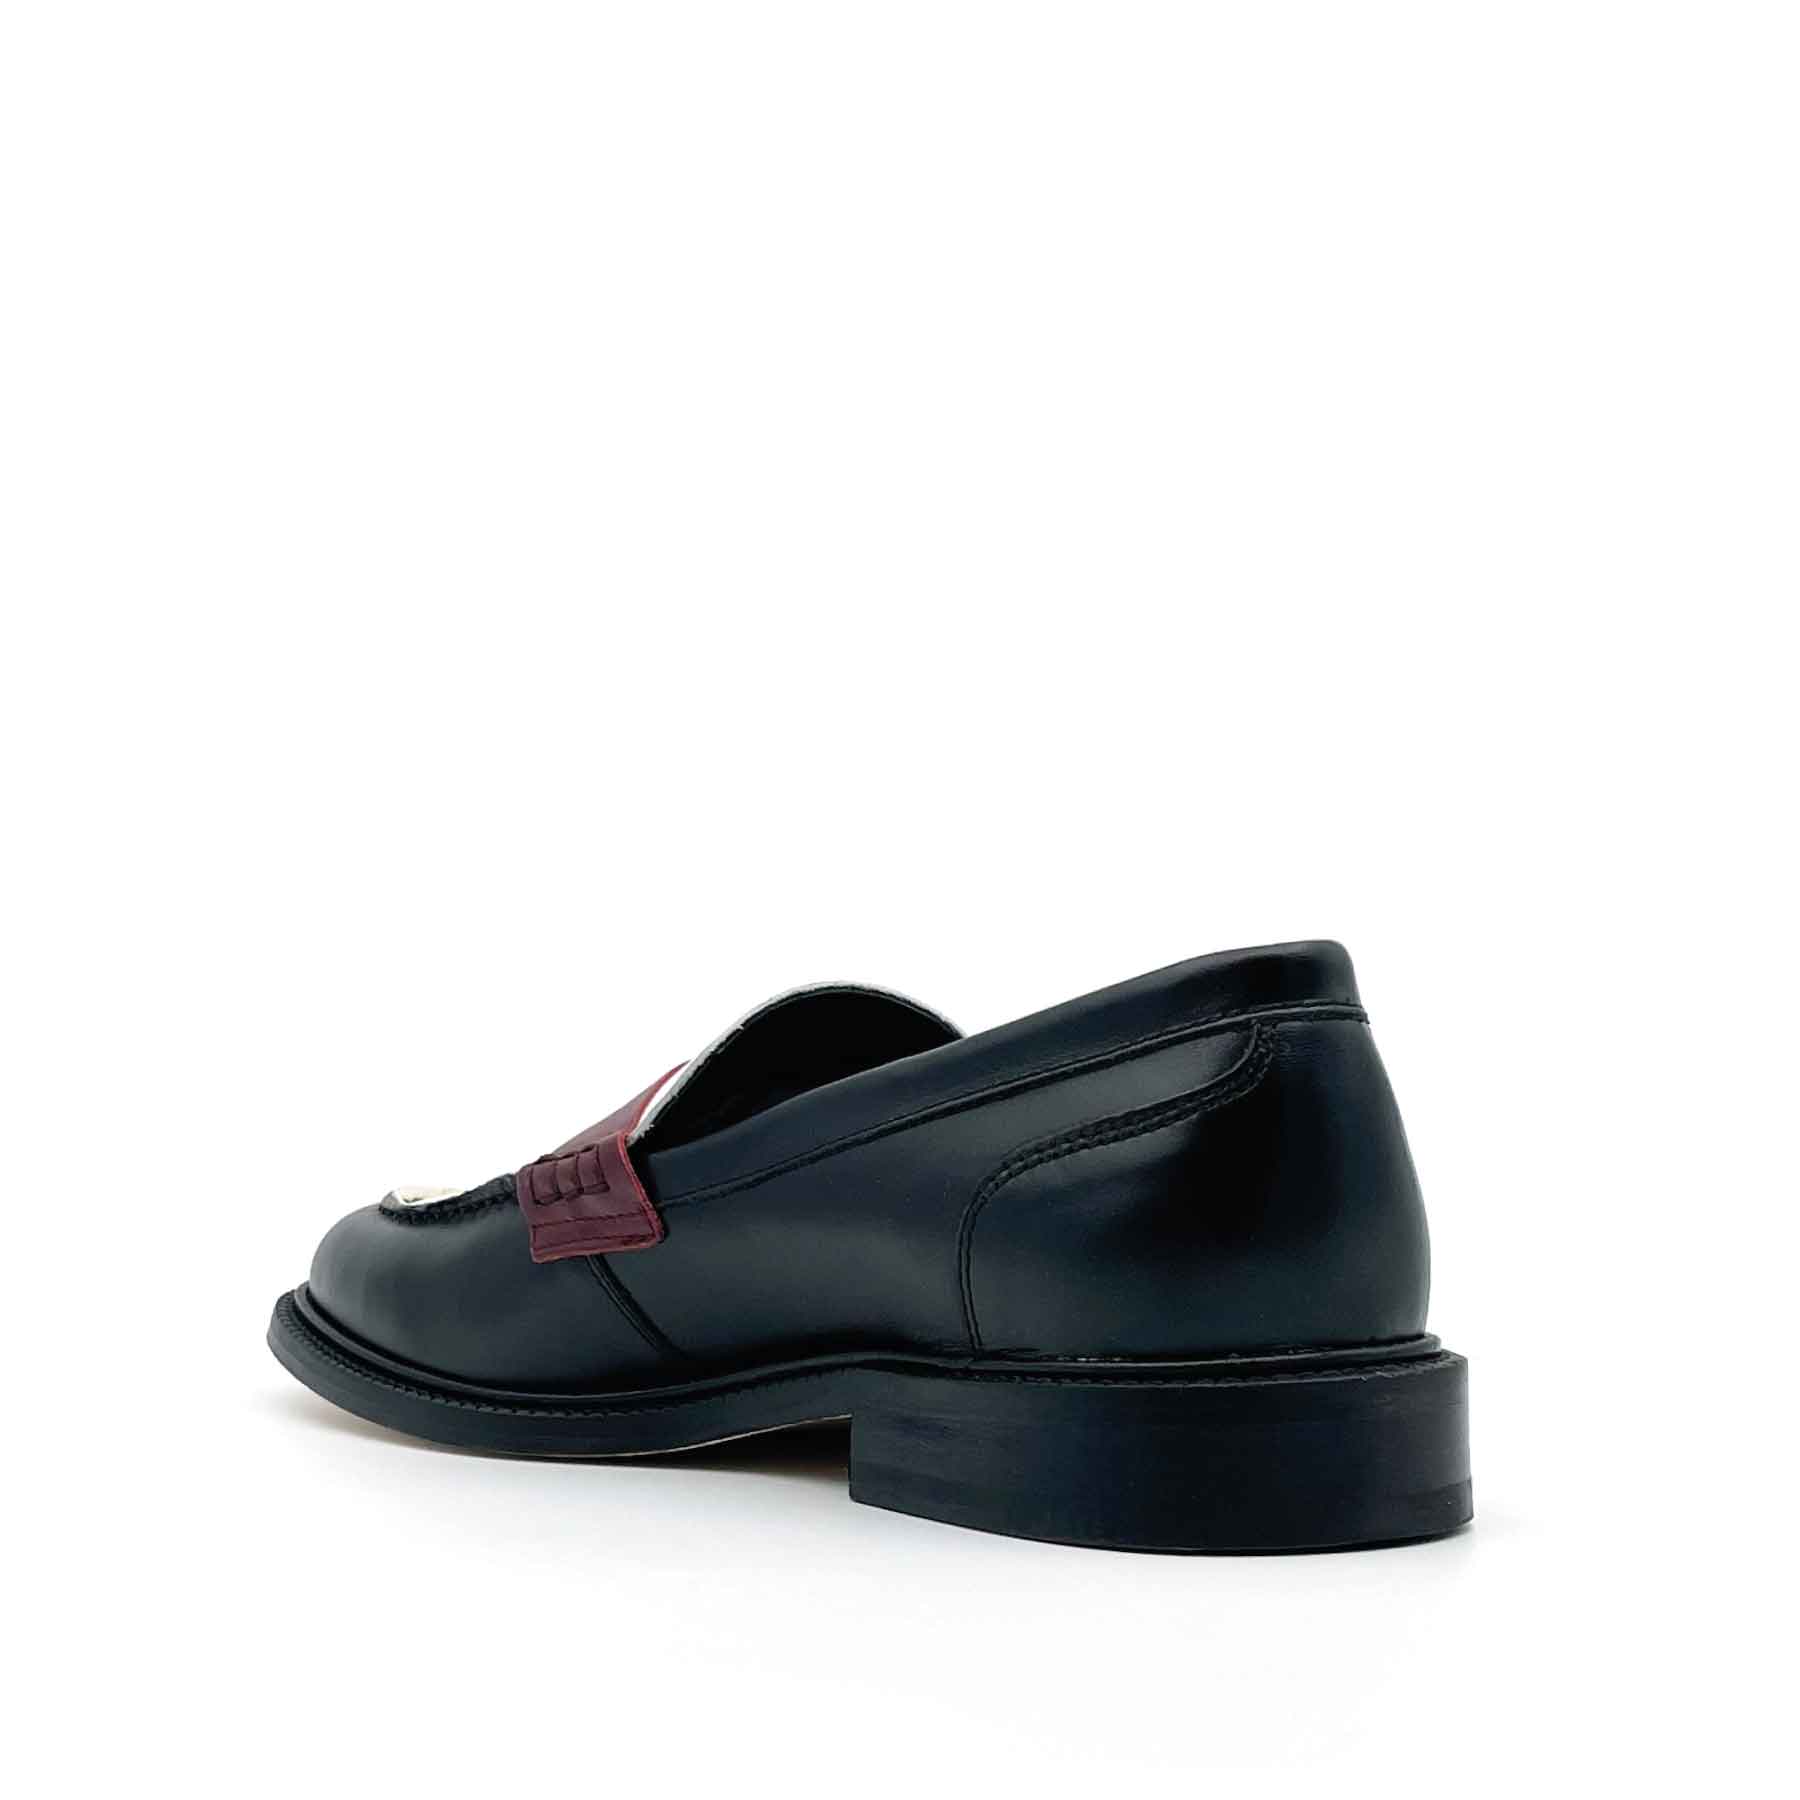 Townee Penny Loafer Tricolour